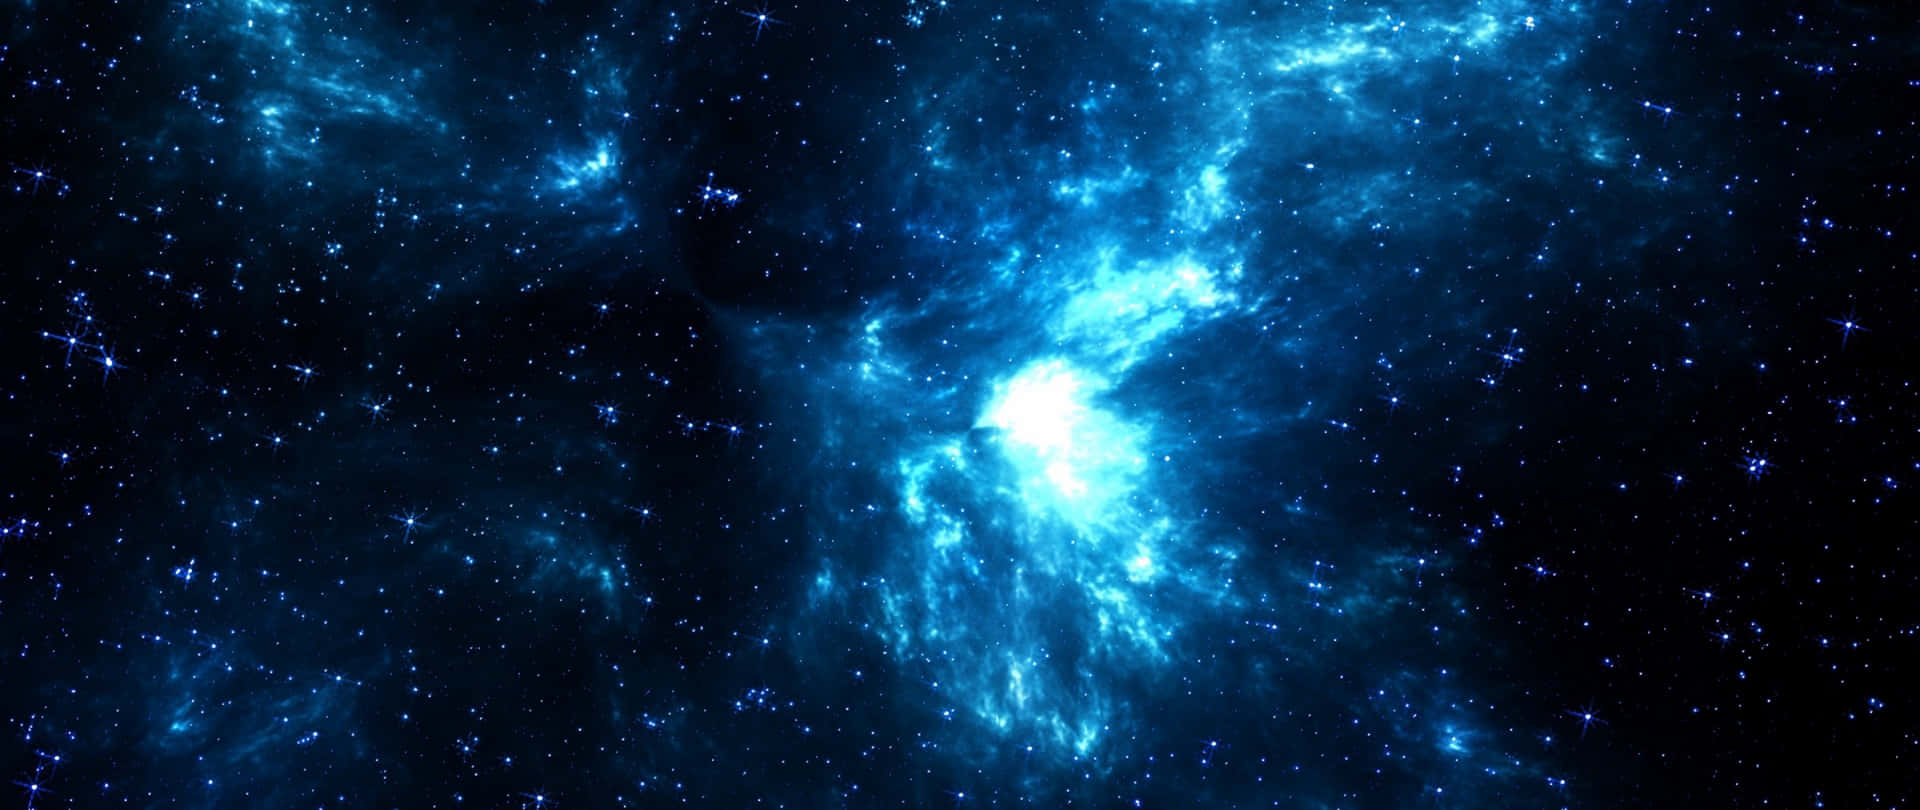 Explore the Green and Blue Galaxy Wallpaper